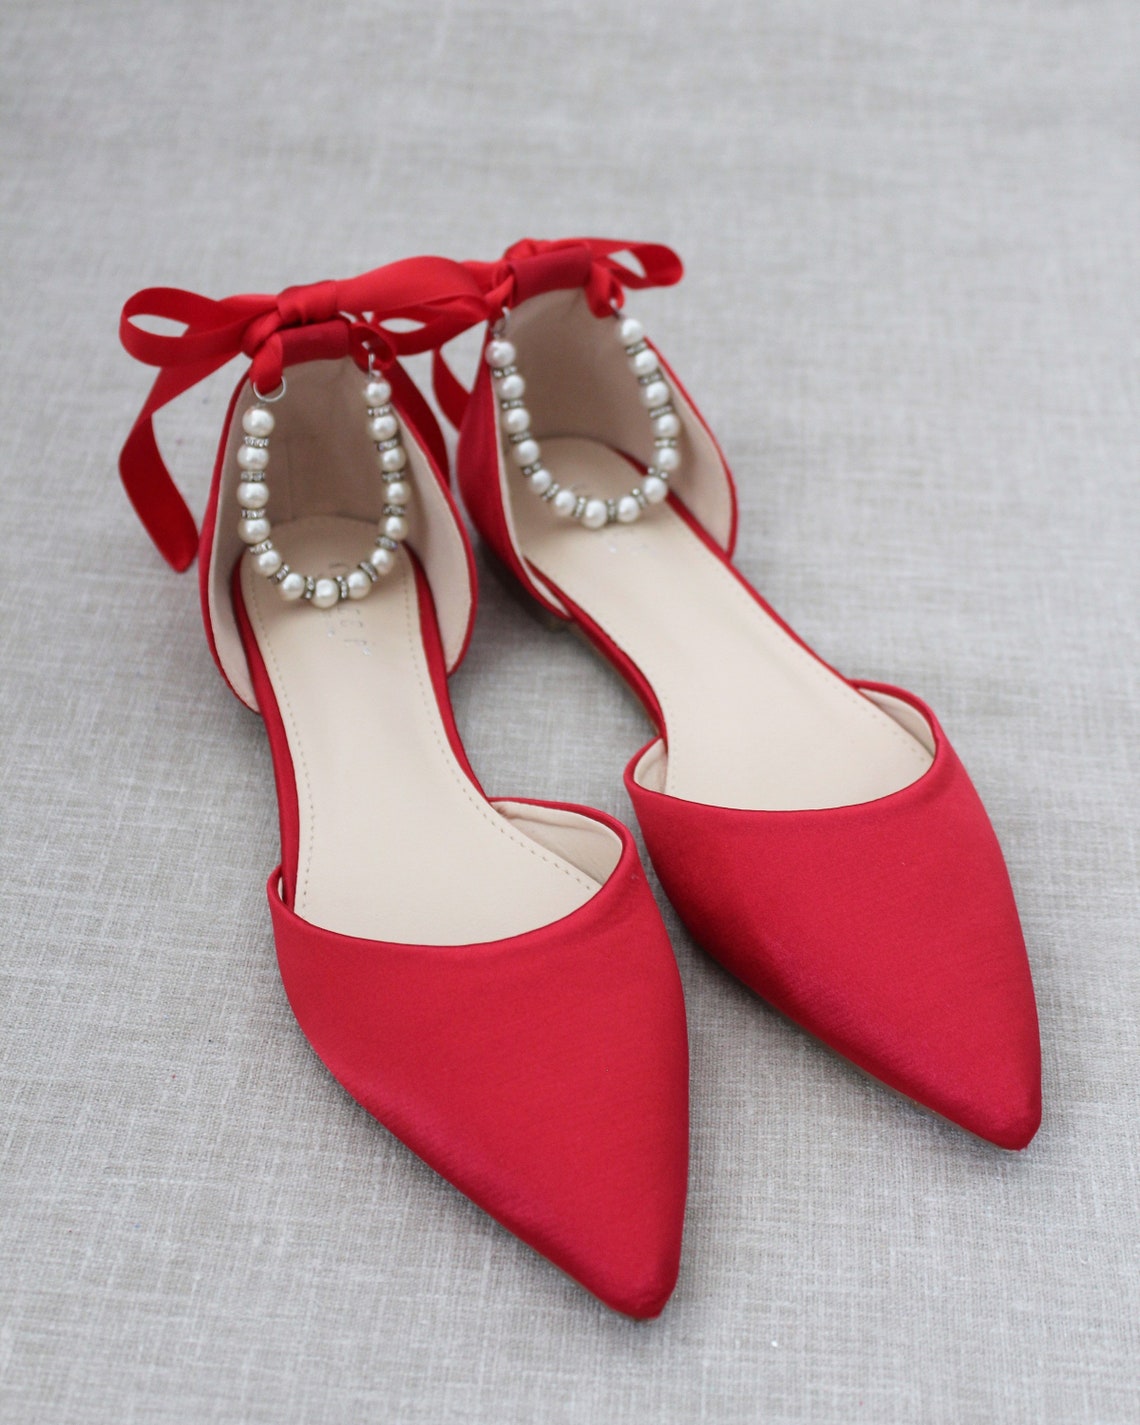 Red Satin Pointy Toe Flats With PEARLS ANKLE STRAP Wedding - Etsy